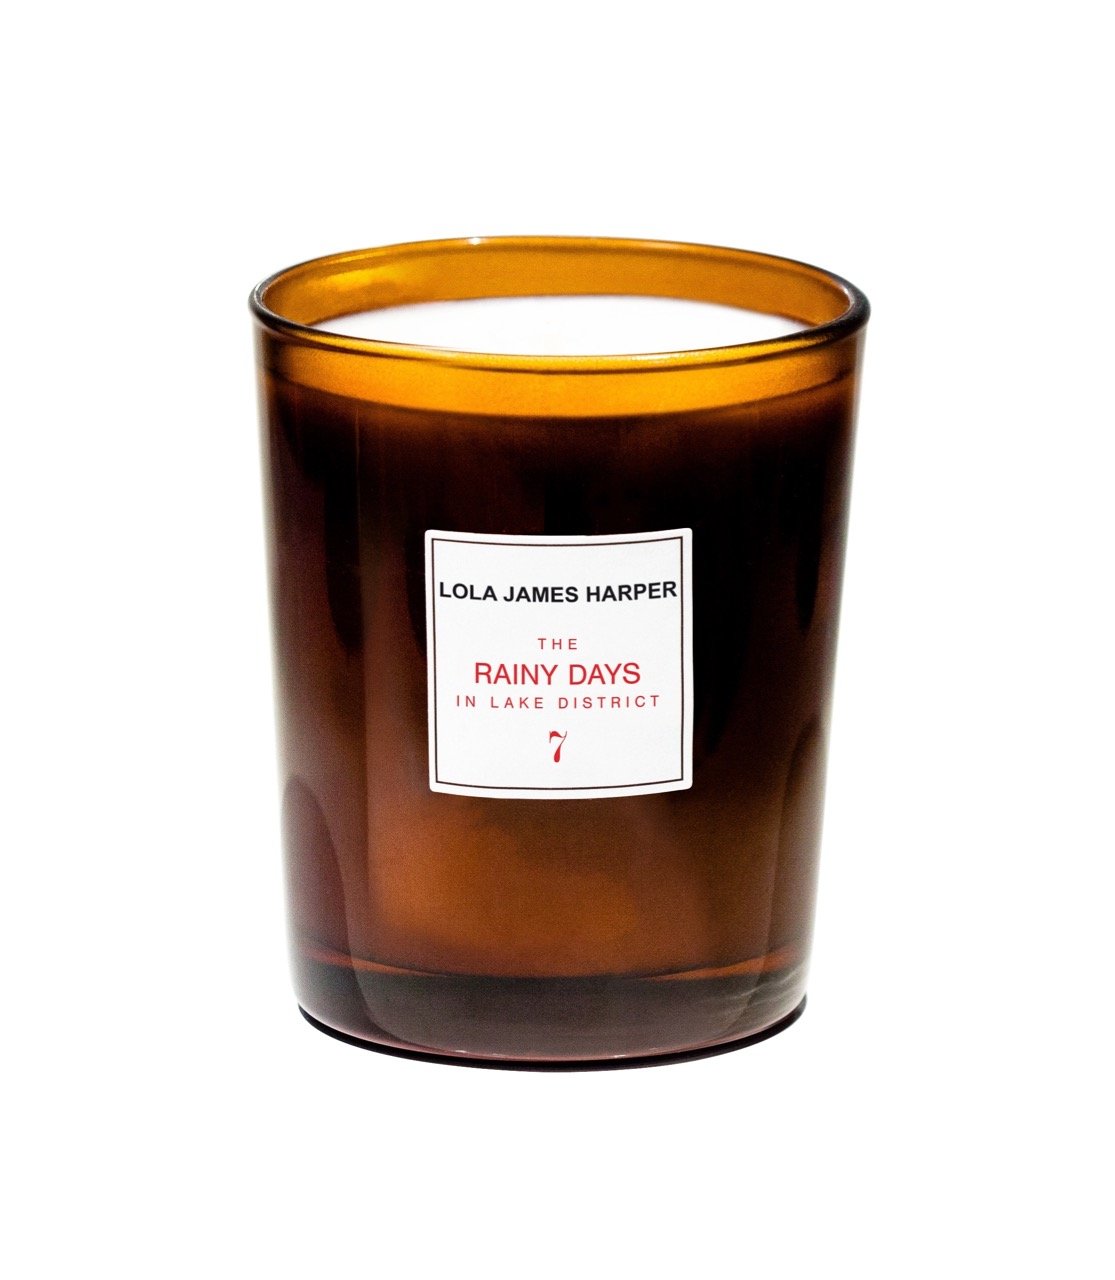 Lola James Harper Candle - The Rainy Days in Lake District